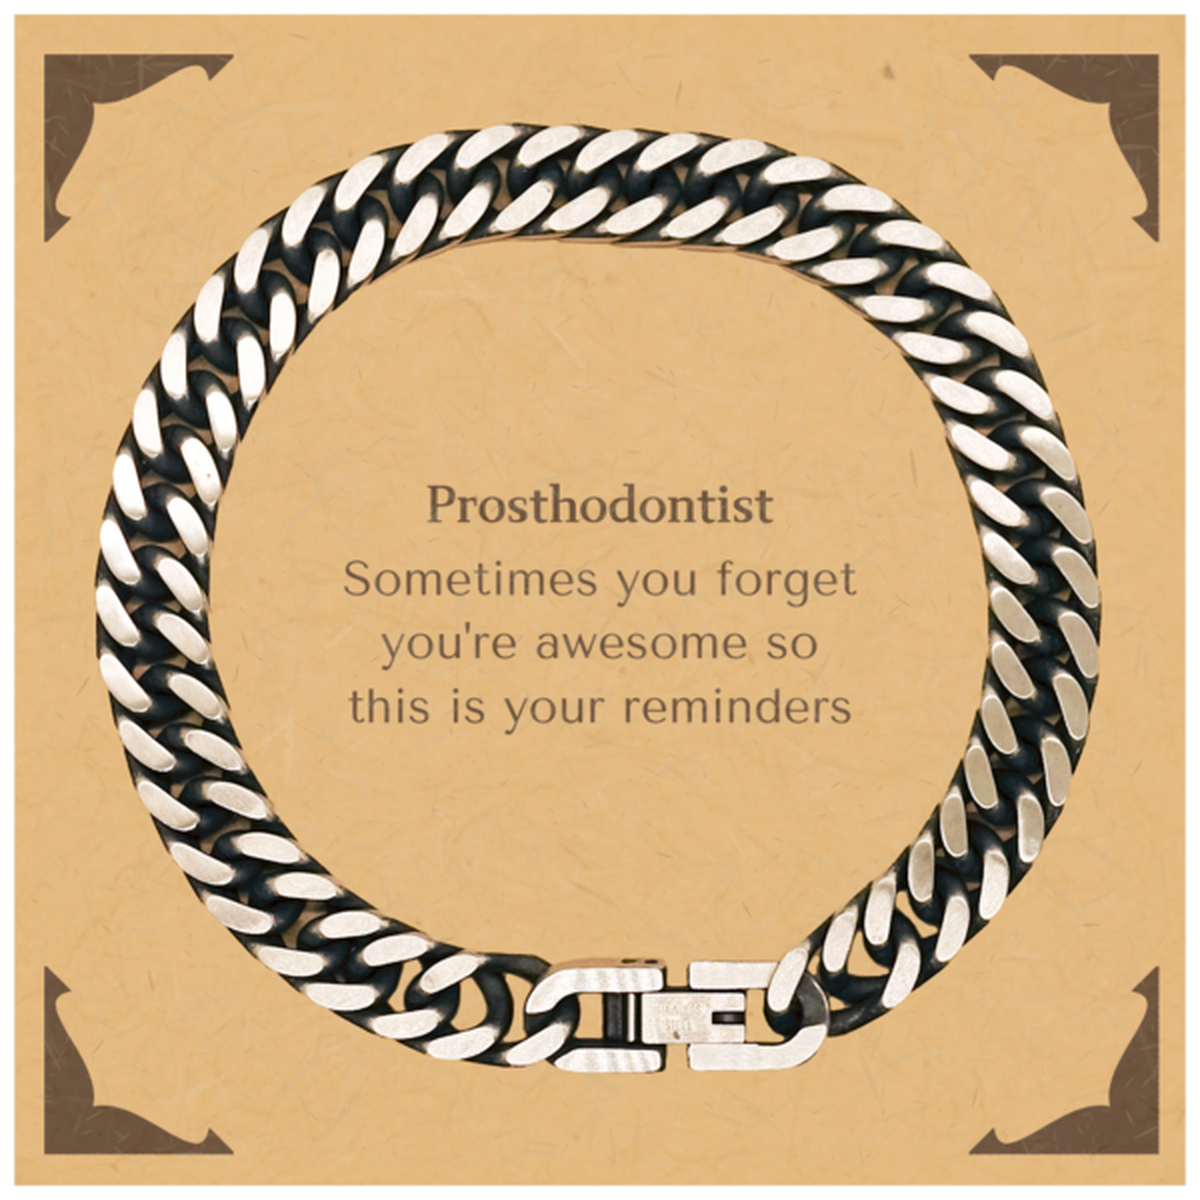 Sentimental Prosthodontist Cuban Link Chain Bracelet, Prosthodontist Sometimes you forget you're awesome so this is your reminders, Graduation Christmas Birthday Gifts for Prosthodontist, Men, Women, Coworkers